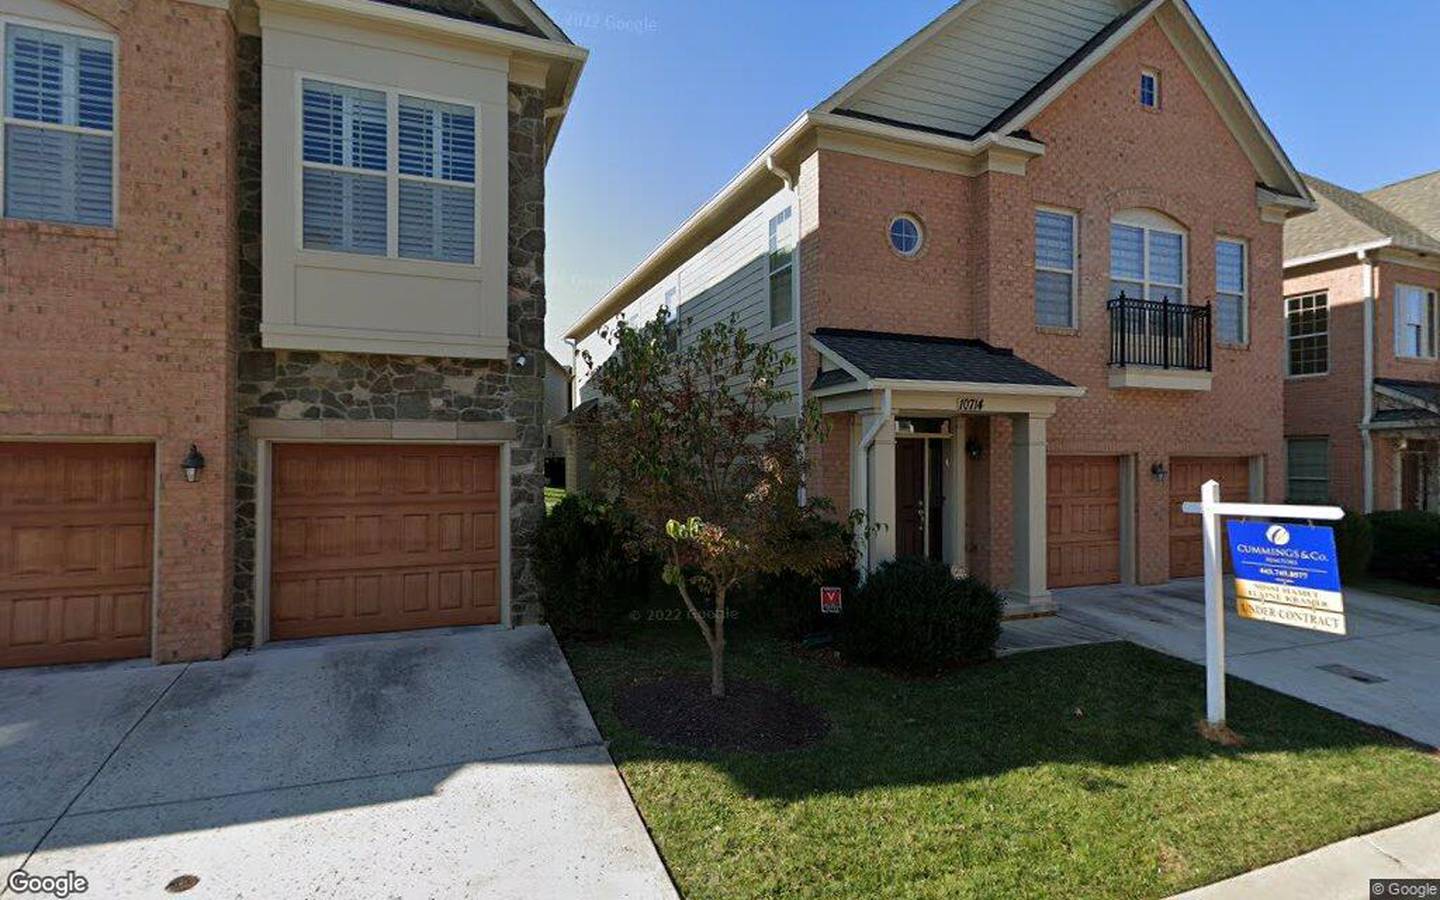 $740,000, townhouse at 10711 McGregor Drive 